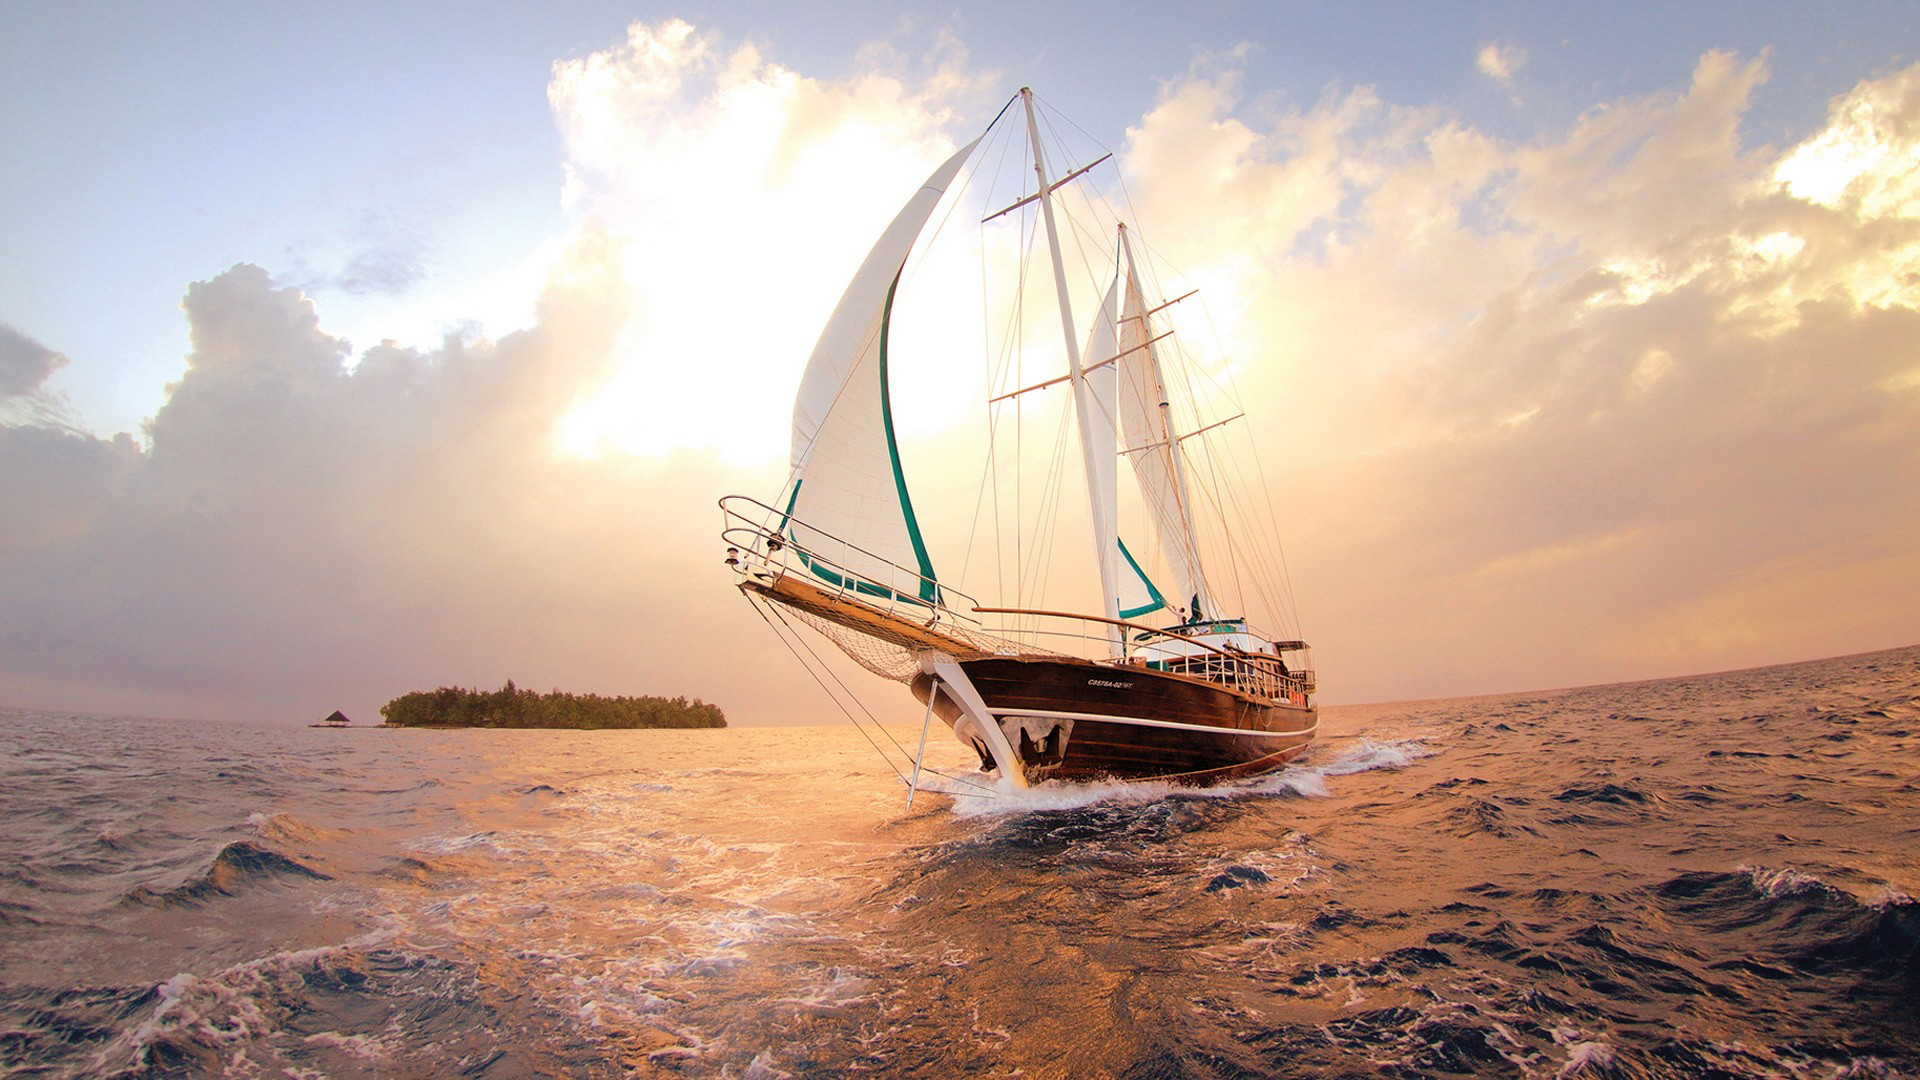 114 Sailing Ship HD Wallpapers | Backgrounds - Wallpaper Abyss